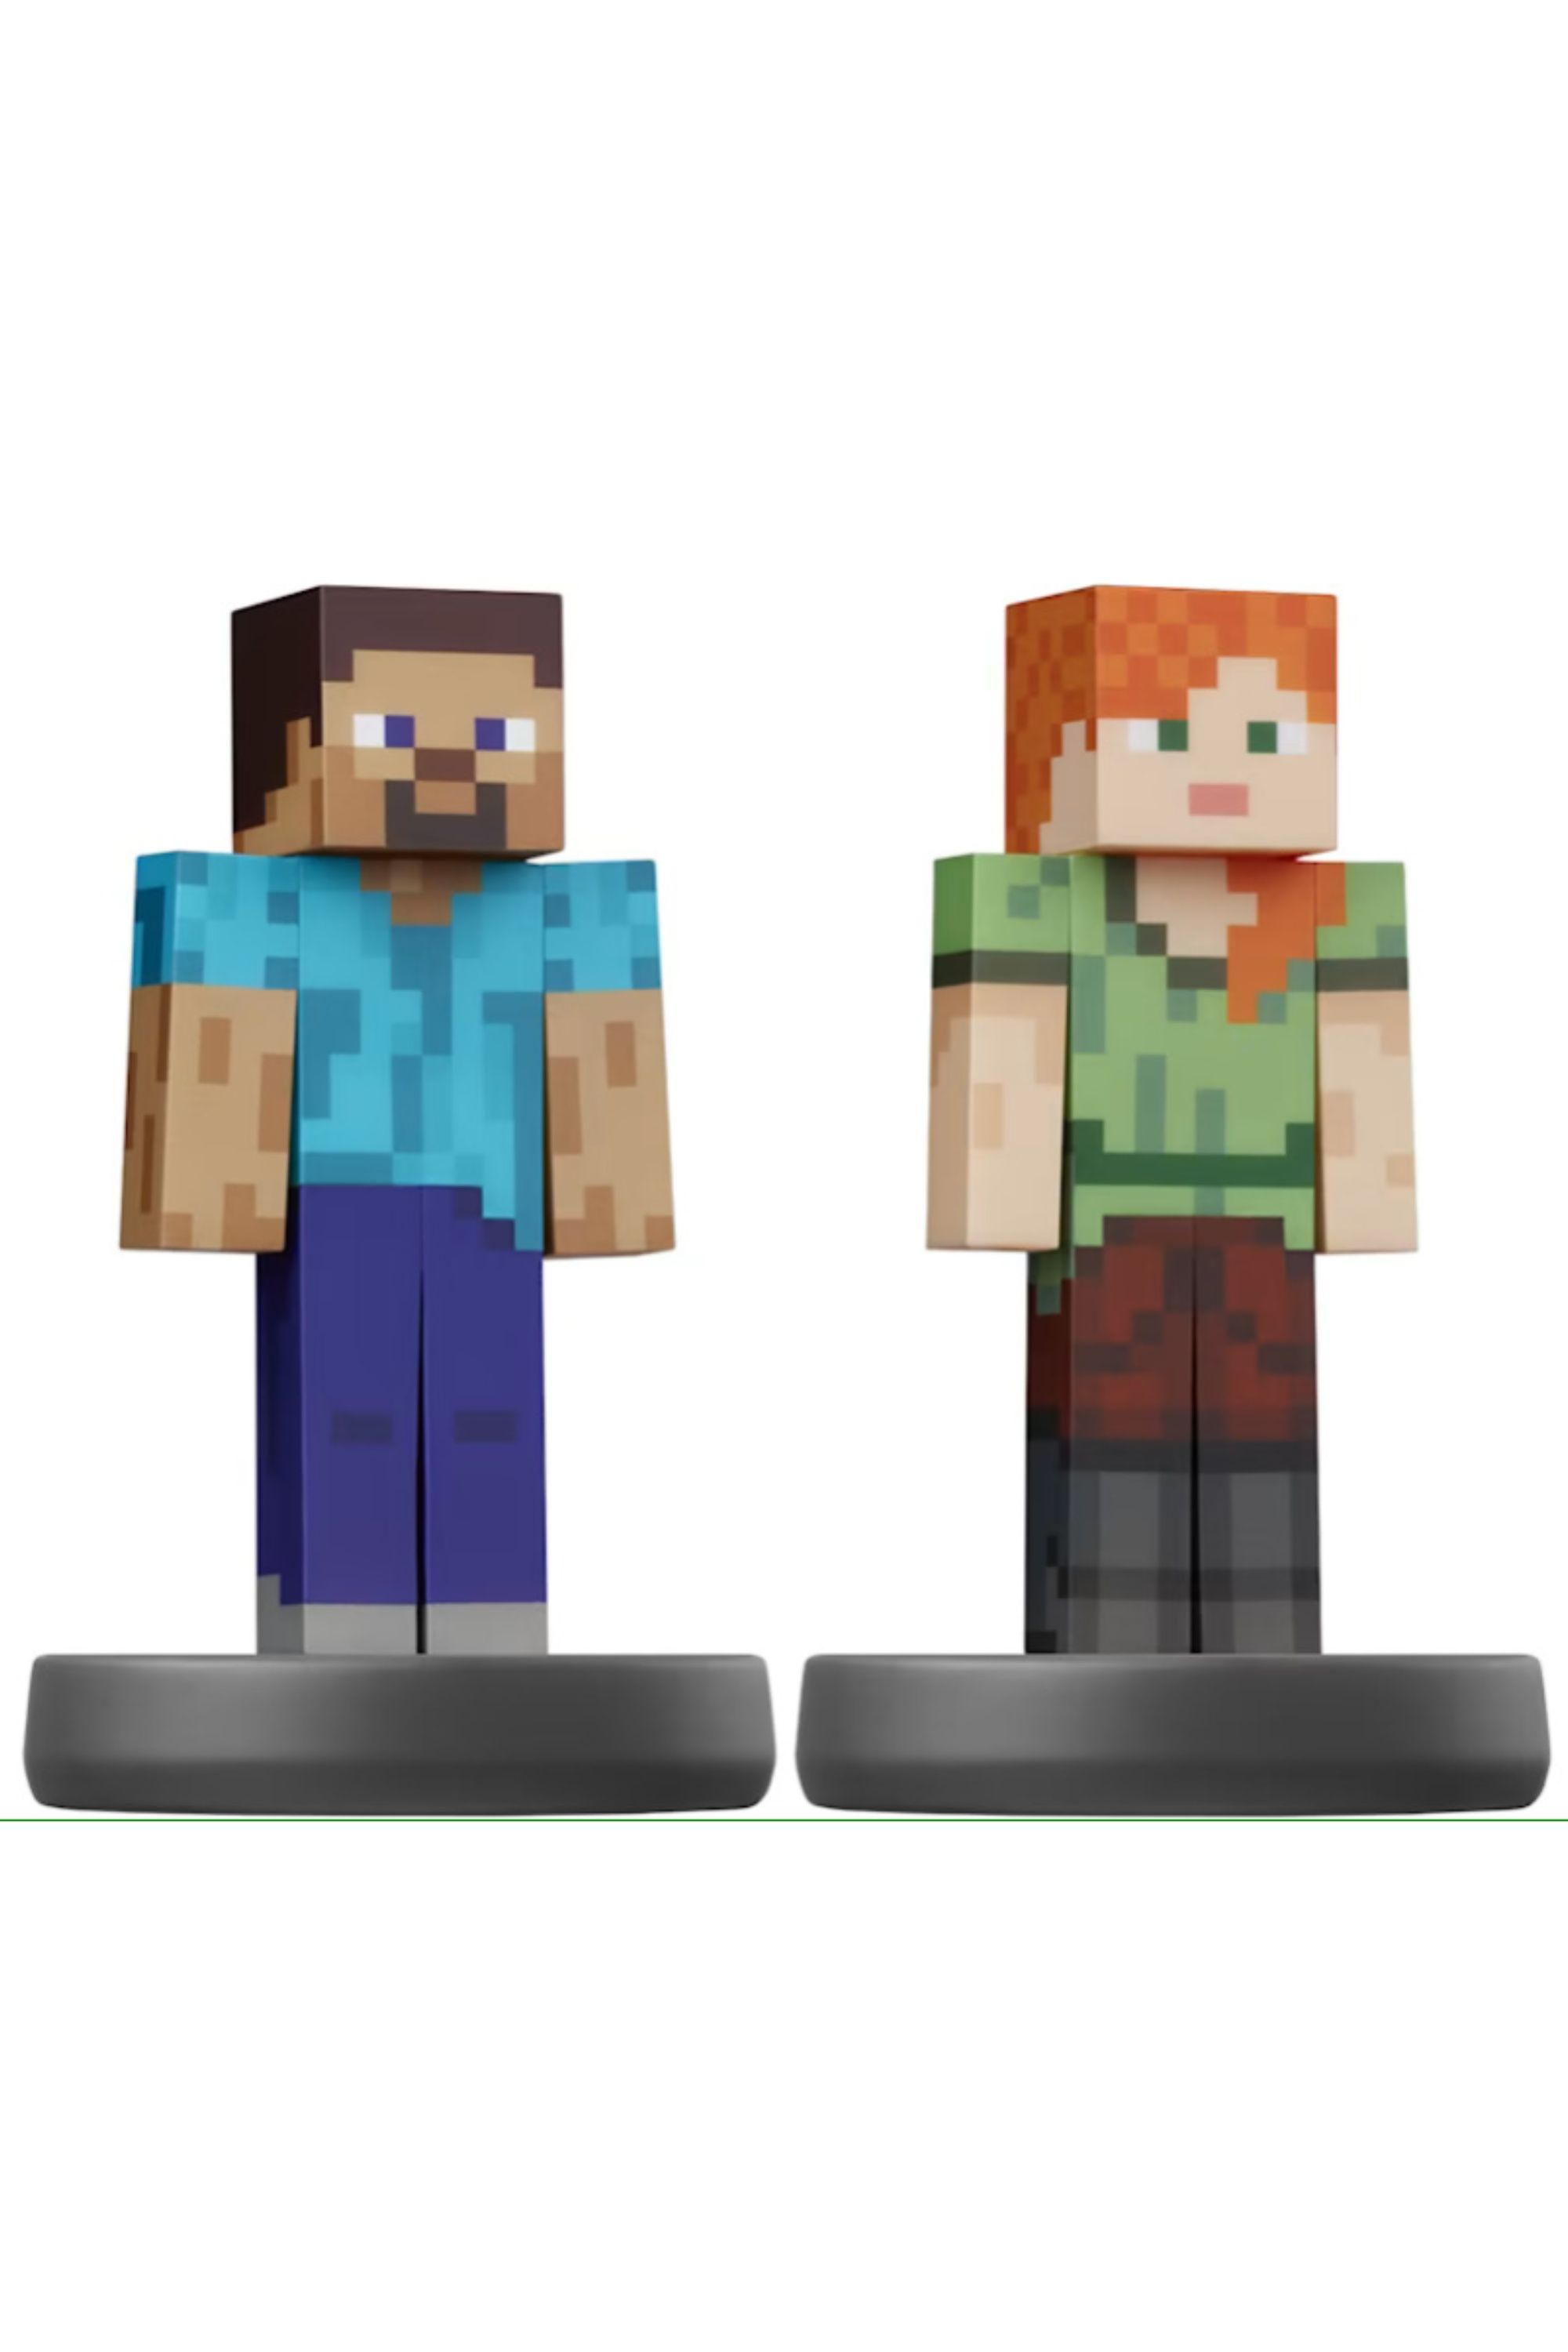 steve and alex from minecraft as amiibos